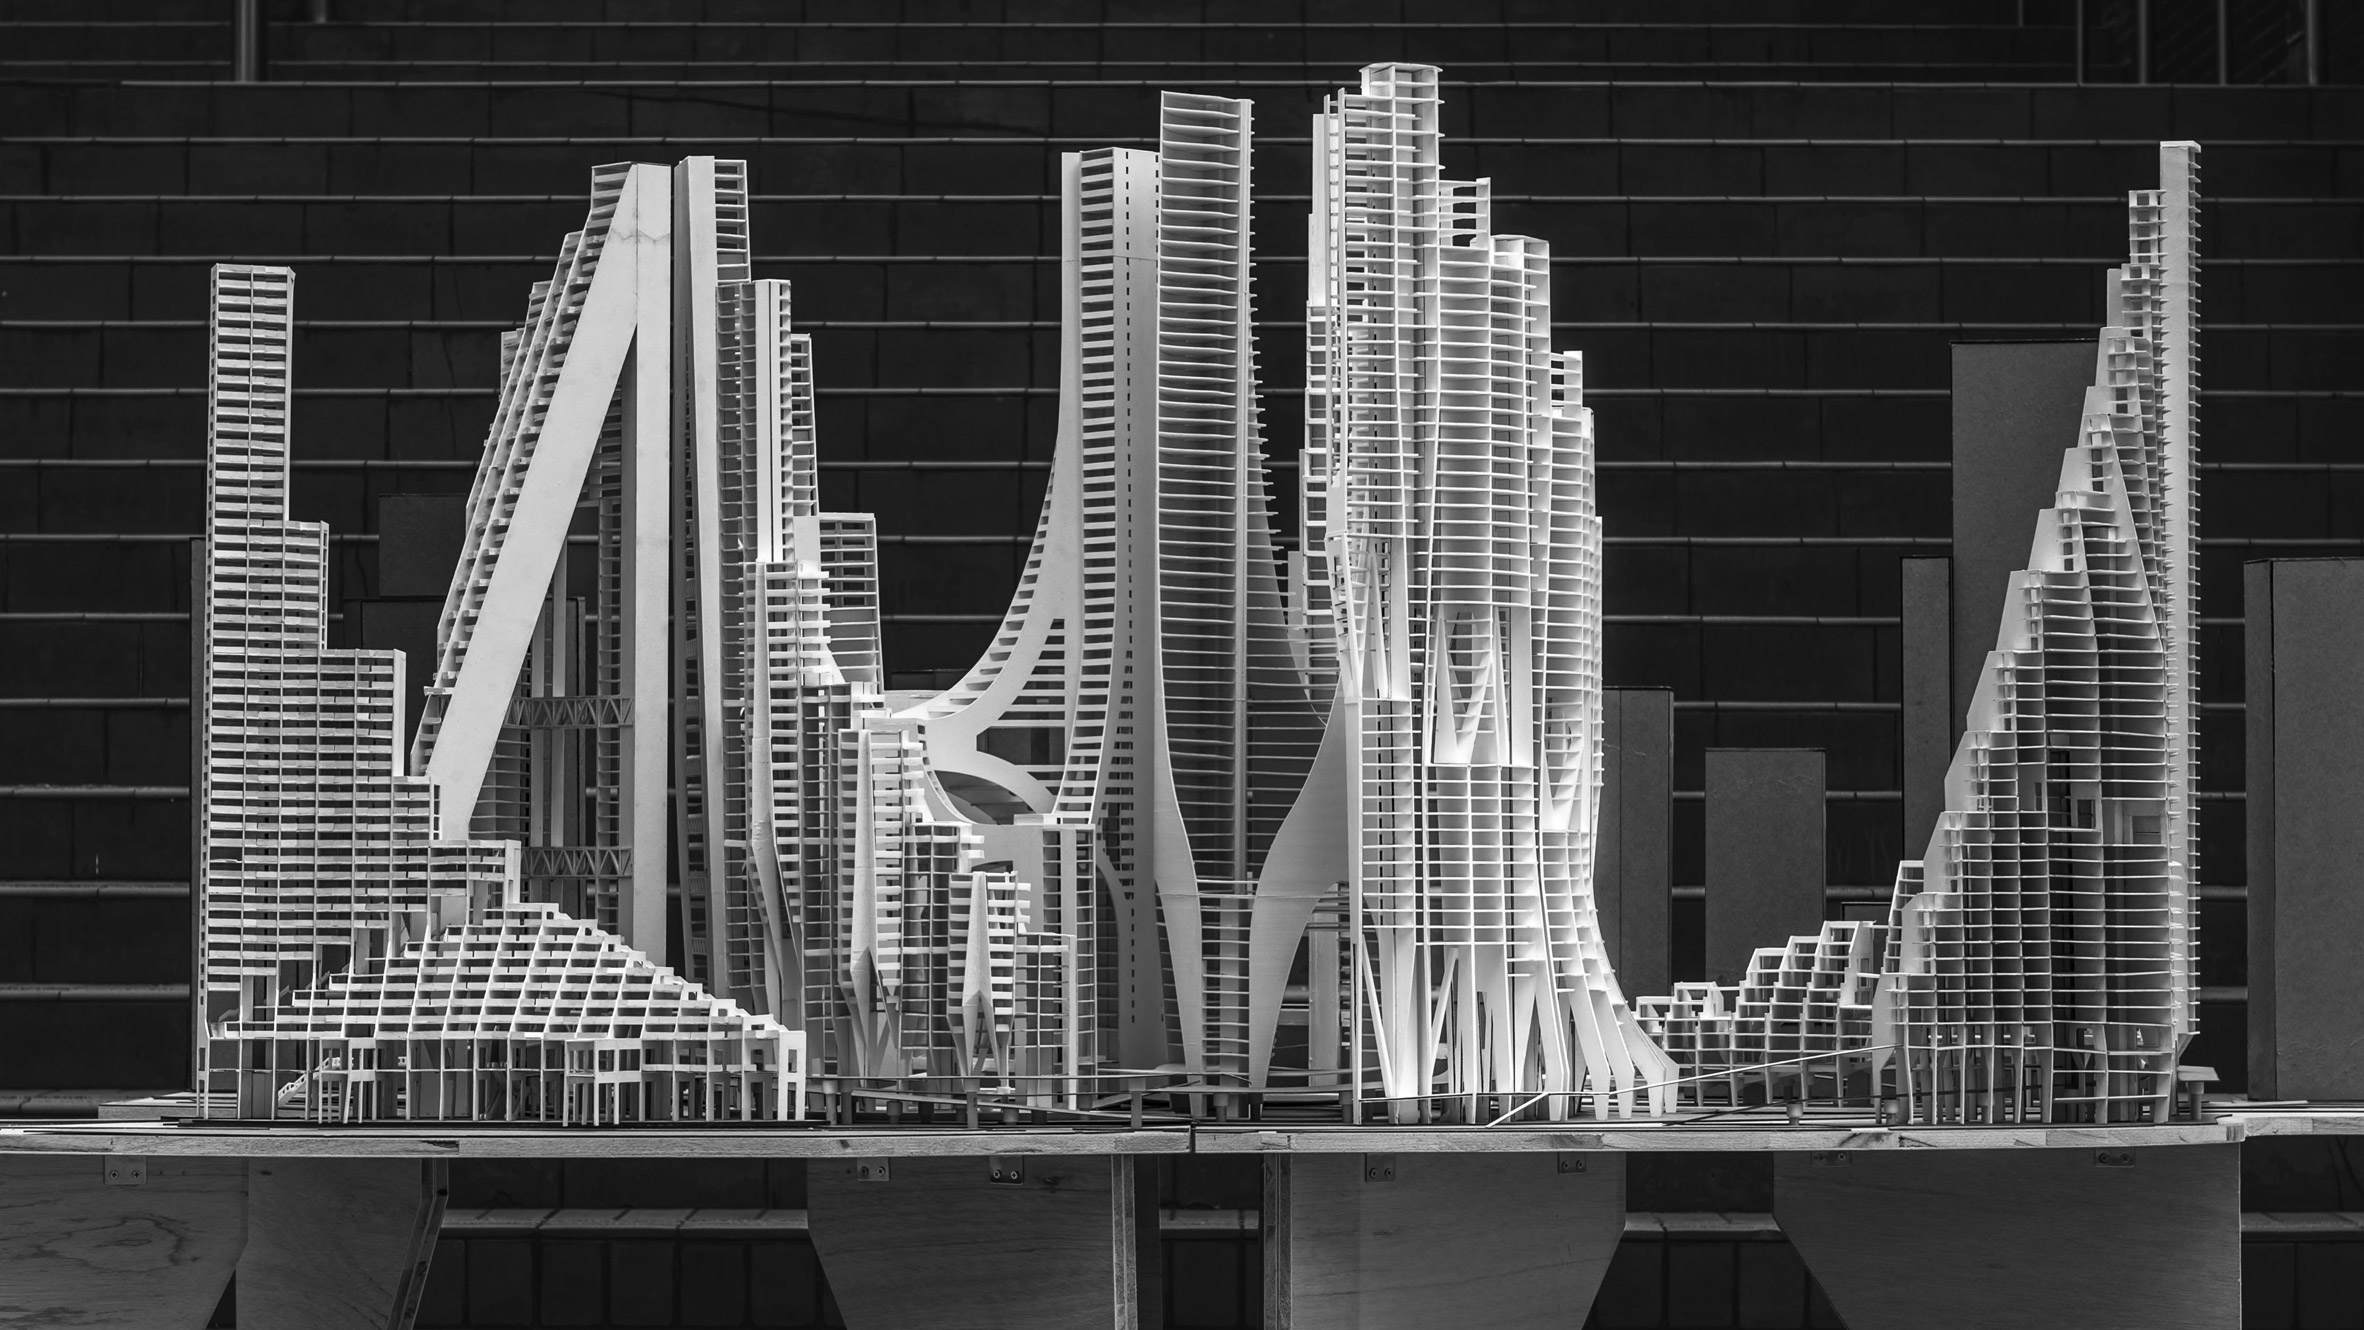 Black and white image of 3D sculpture of buildings